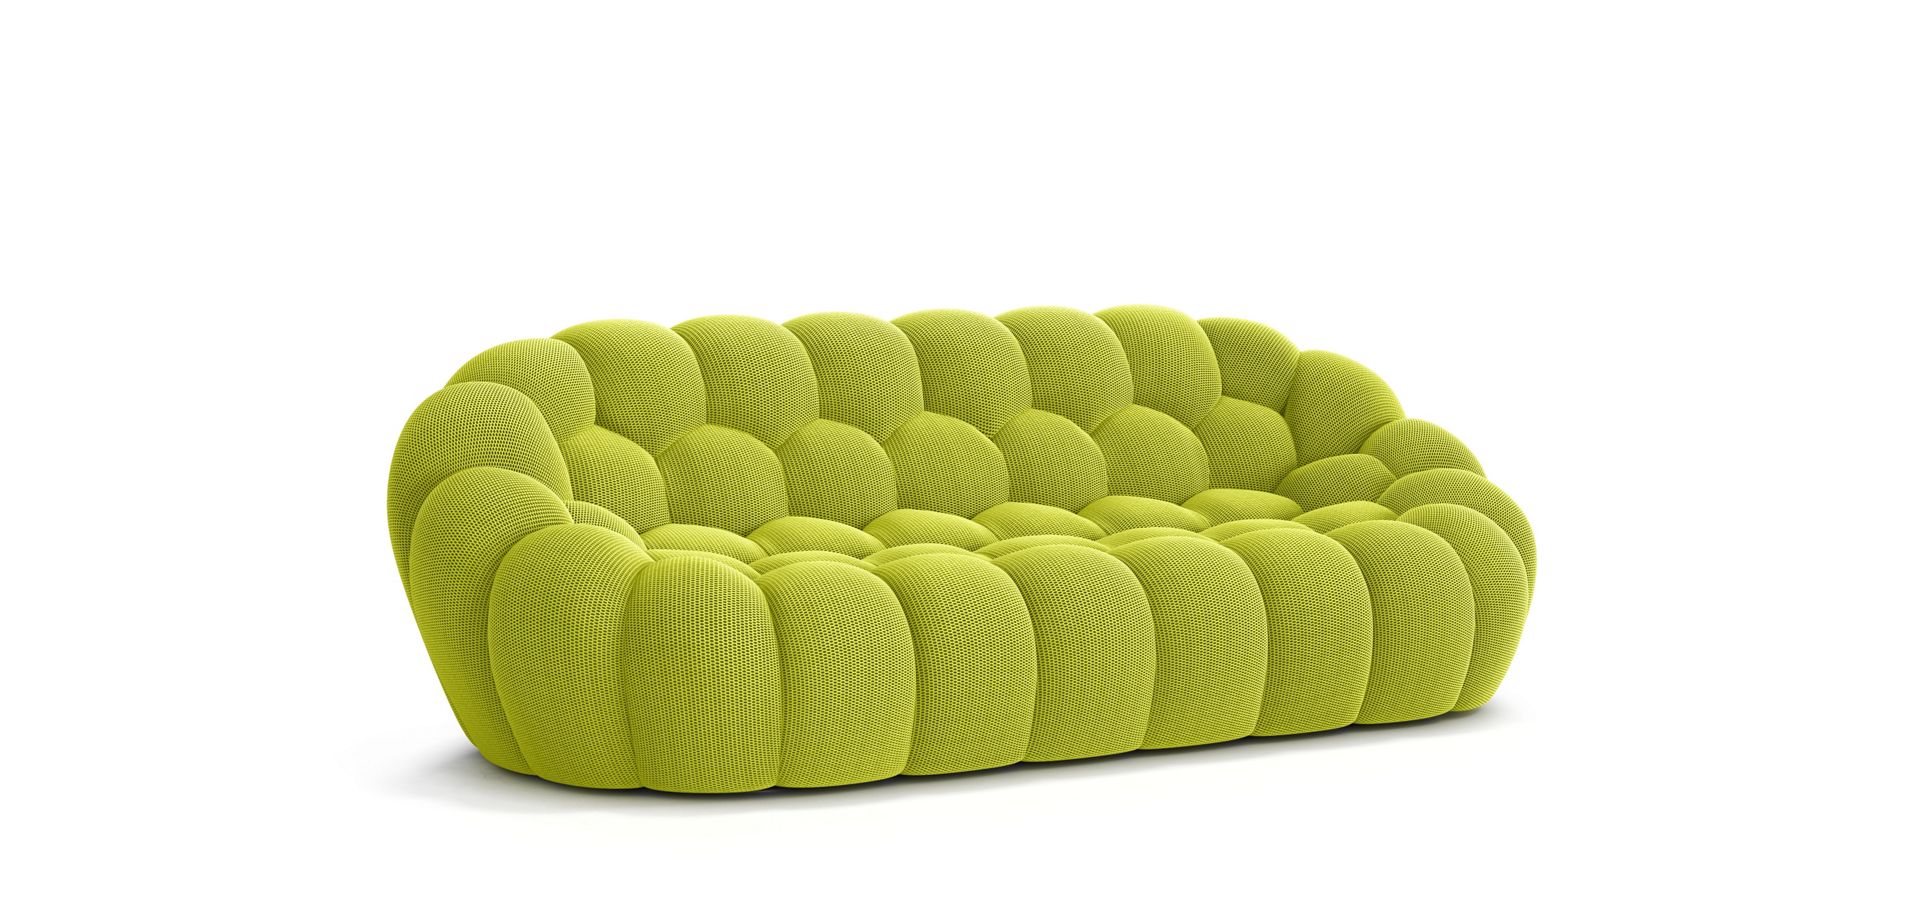 large 3-seat sofa - techno 3D image number 1